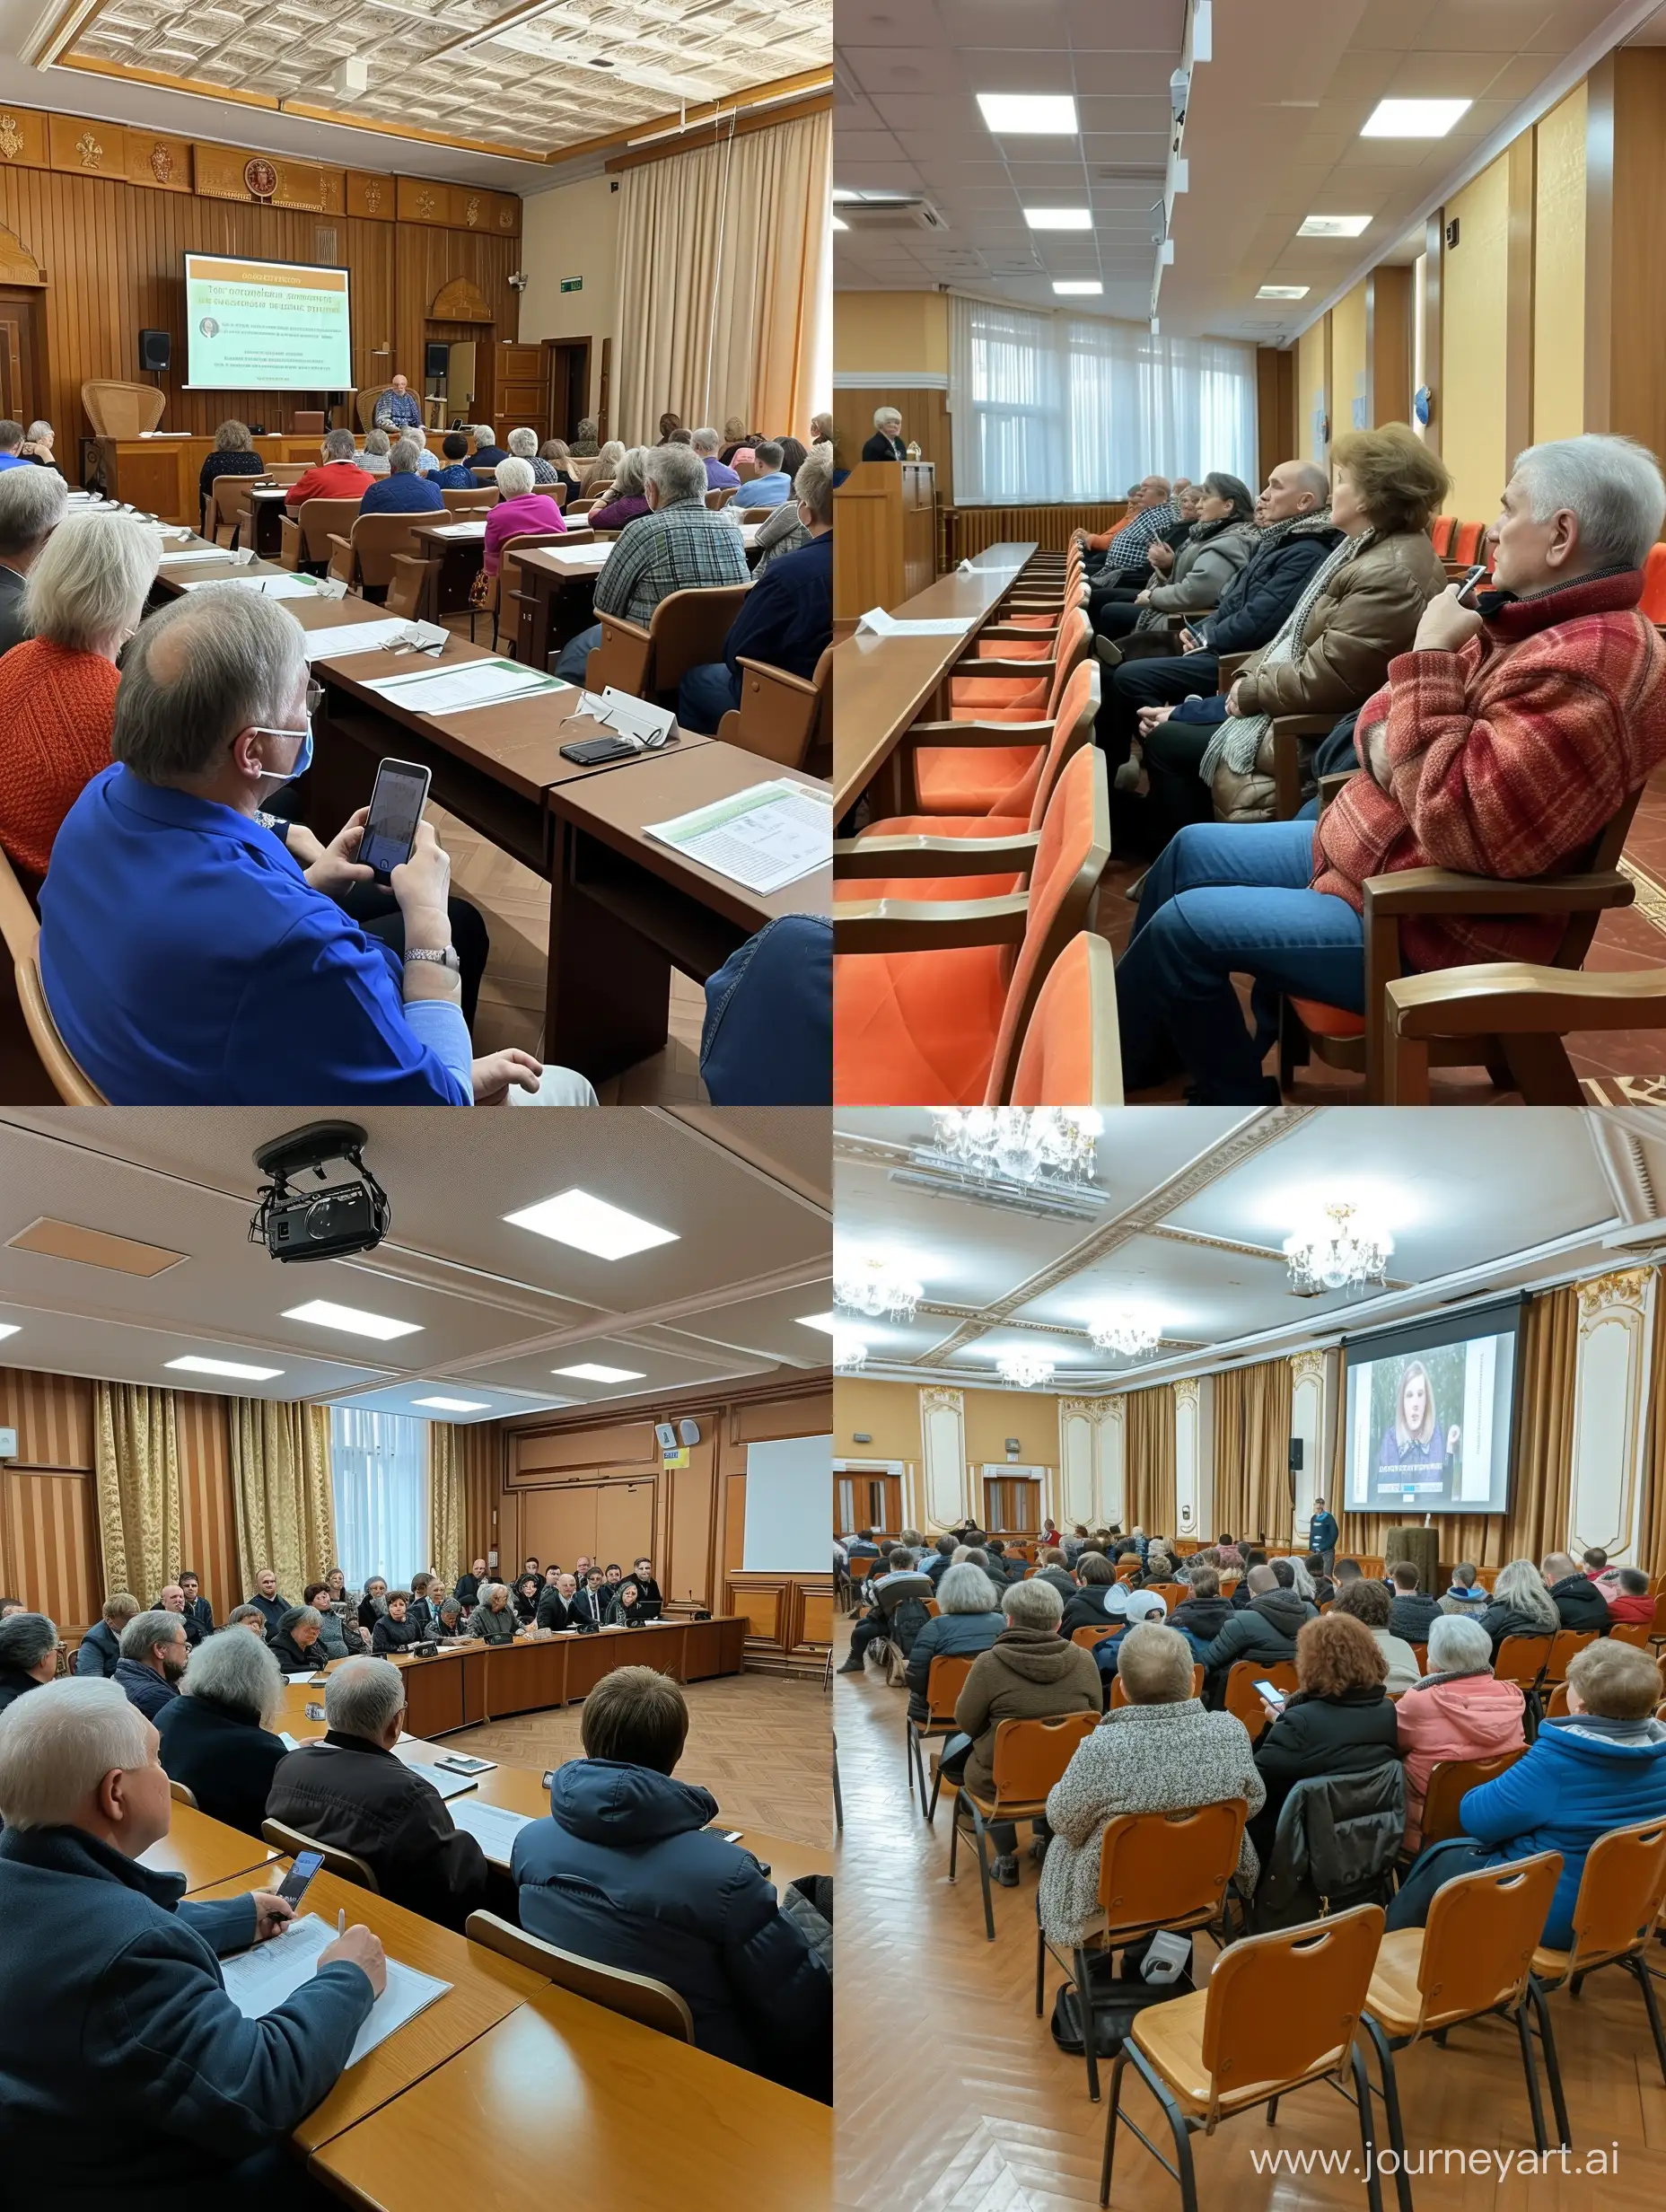 A meeting with residents of the district was held in the assembly hall of the Tverskoy district Council of Moscow. You need a photo on your phone, the participants of the event are aged 45-70 years old.